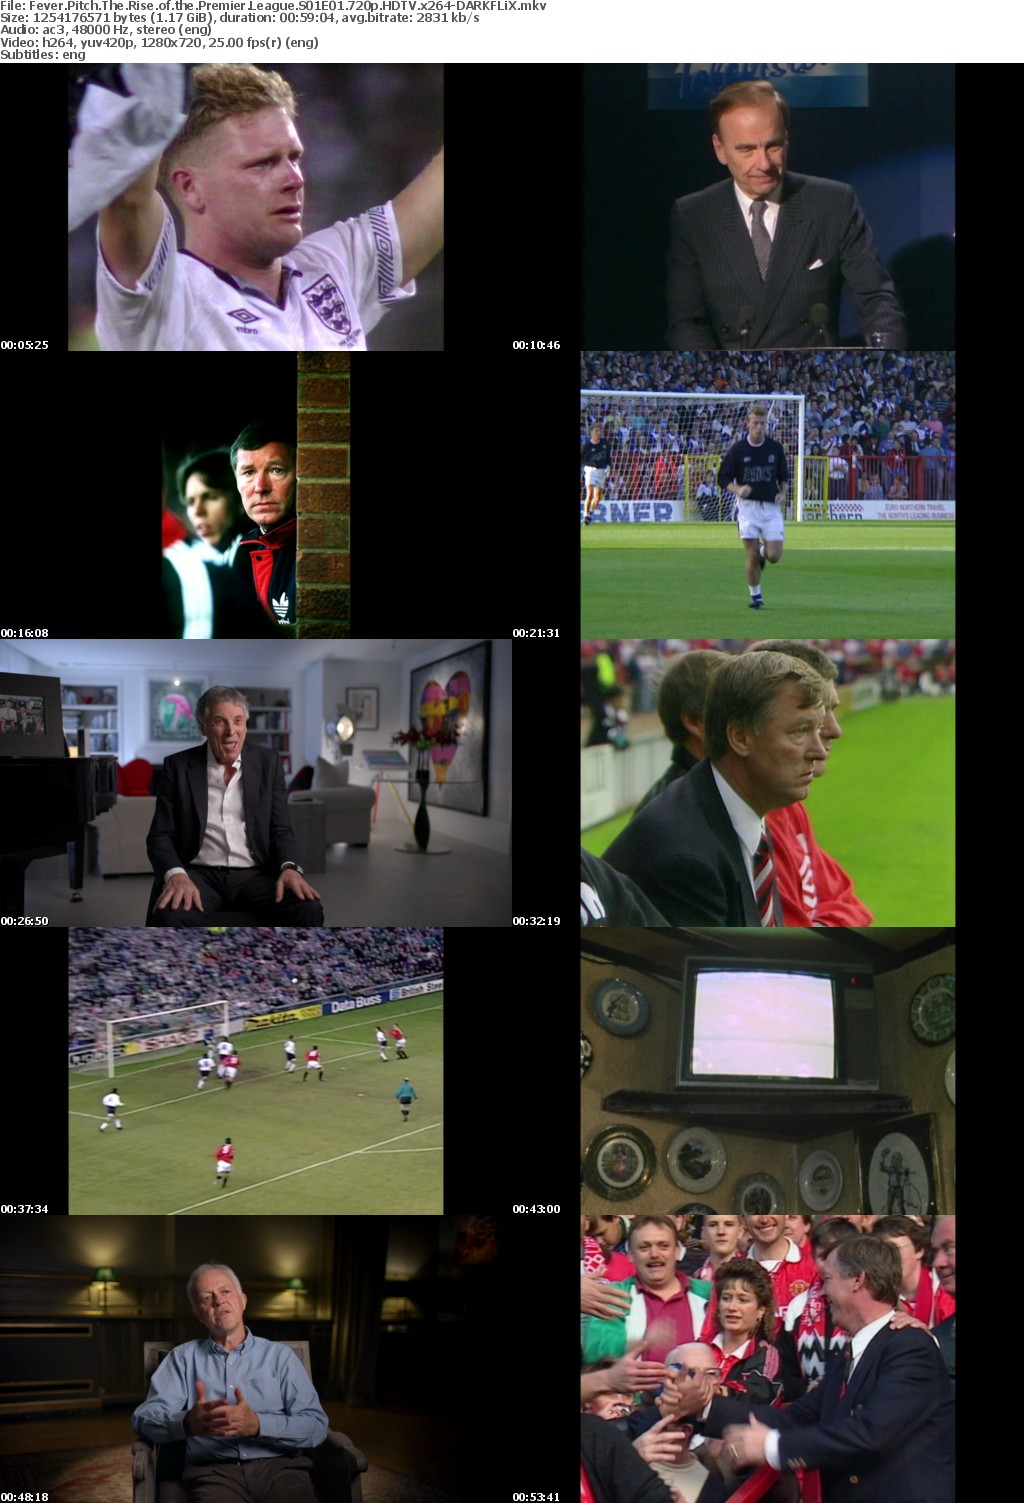 Fever Pitch The Rise of the Premier League S01E01 720p HDTV x264-DARKFLiX